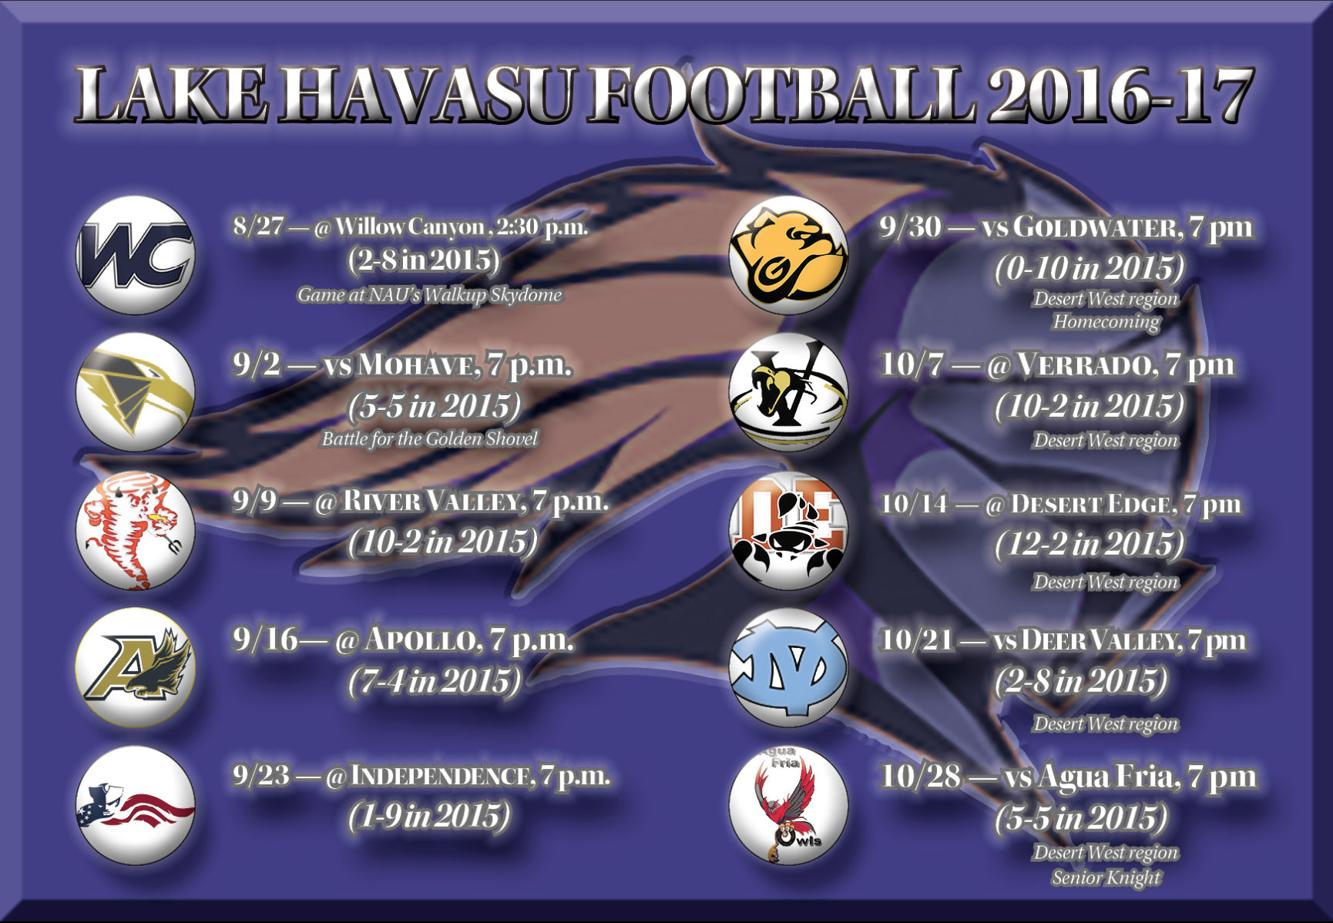 Lake Havasu football schedule features six road, four home games